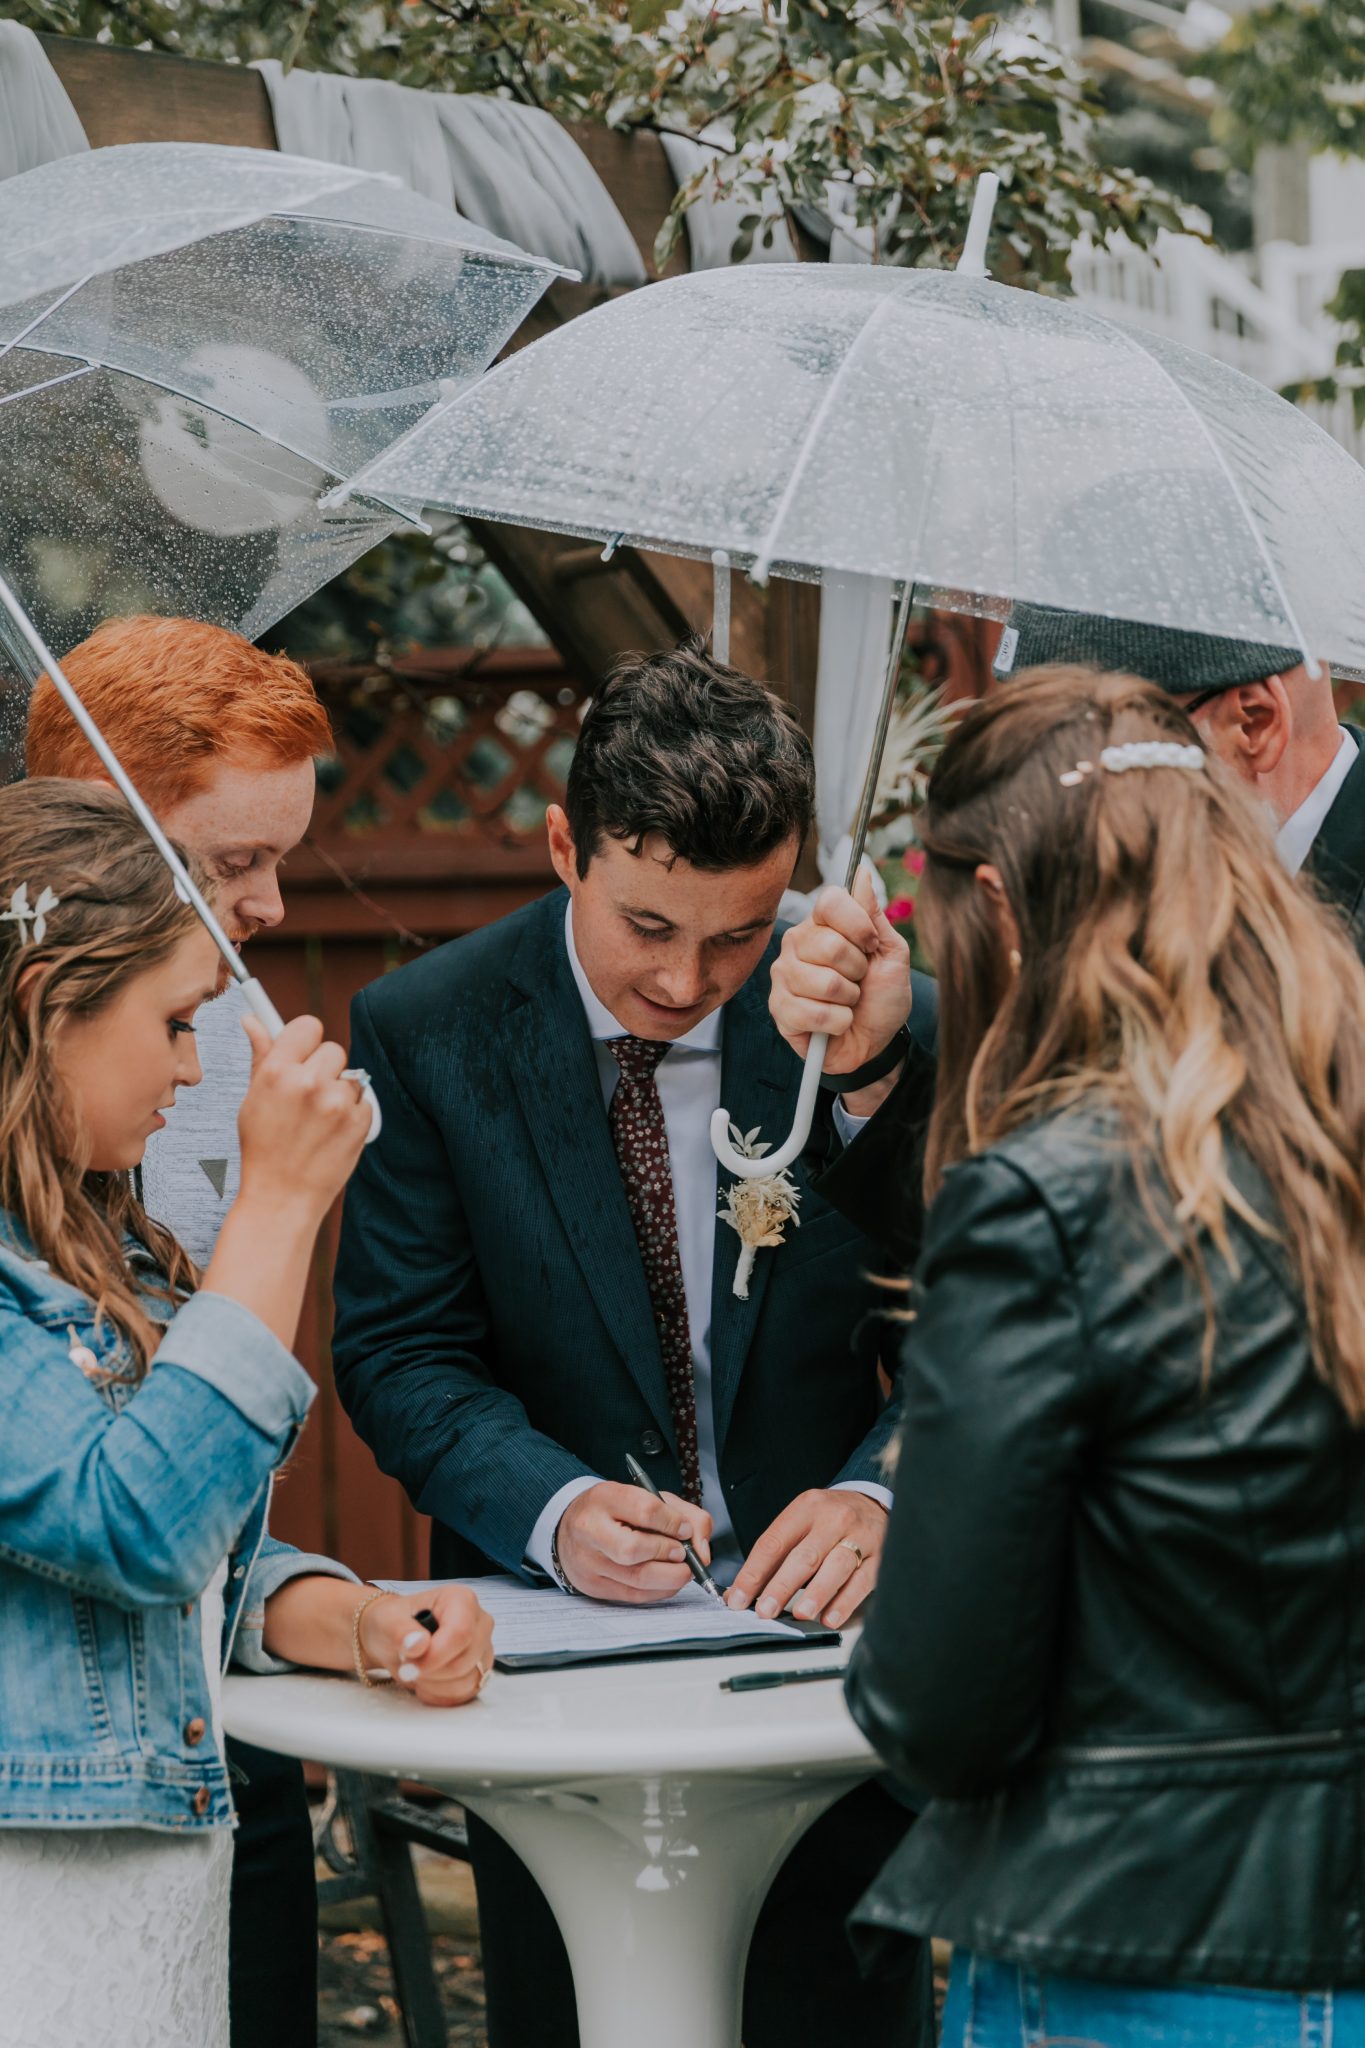 A Little Bit of Rain and Covid Restrictions weren't about to Slow This Couple Down! Featured on Brontë Bride, clear umbrella, rainy wedding